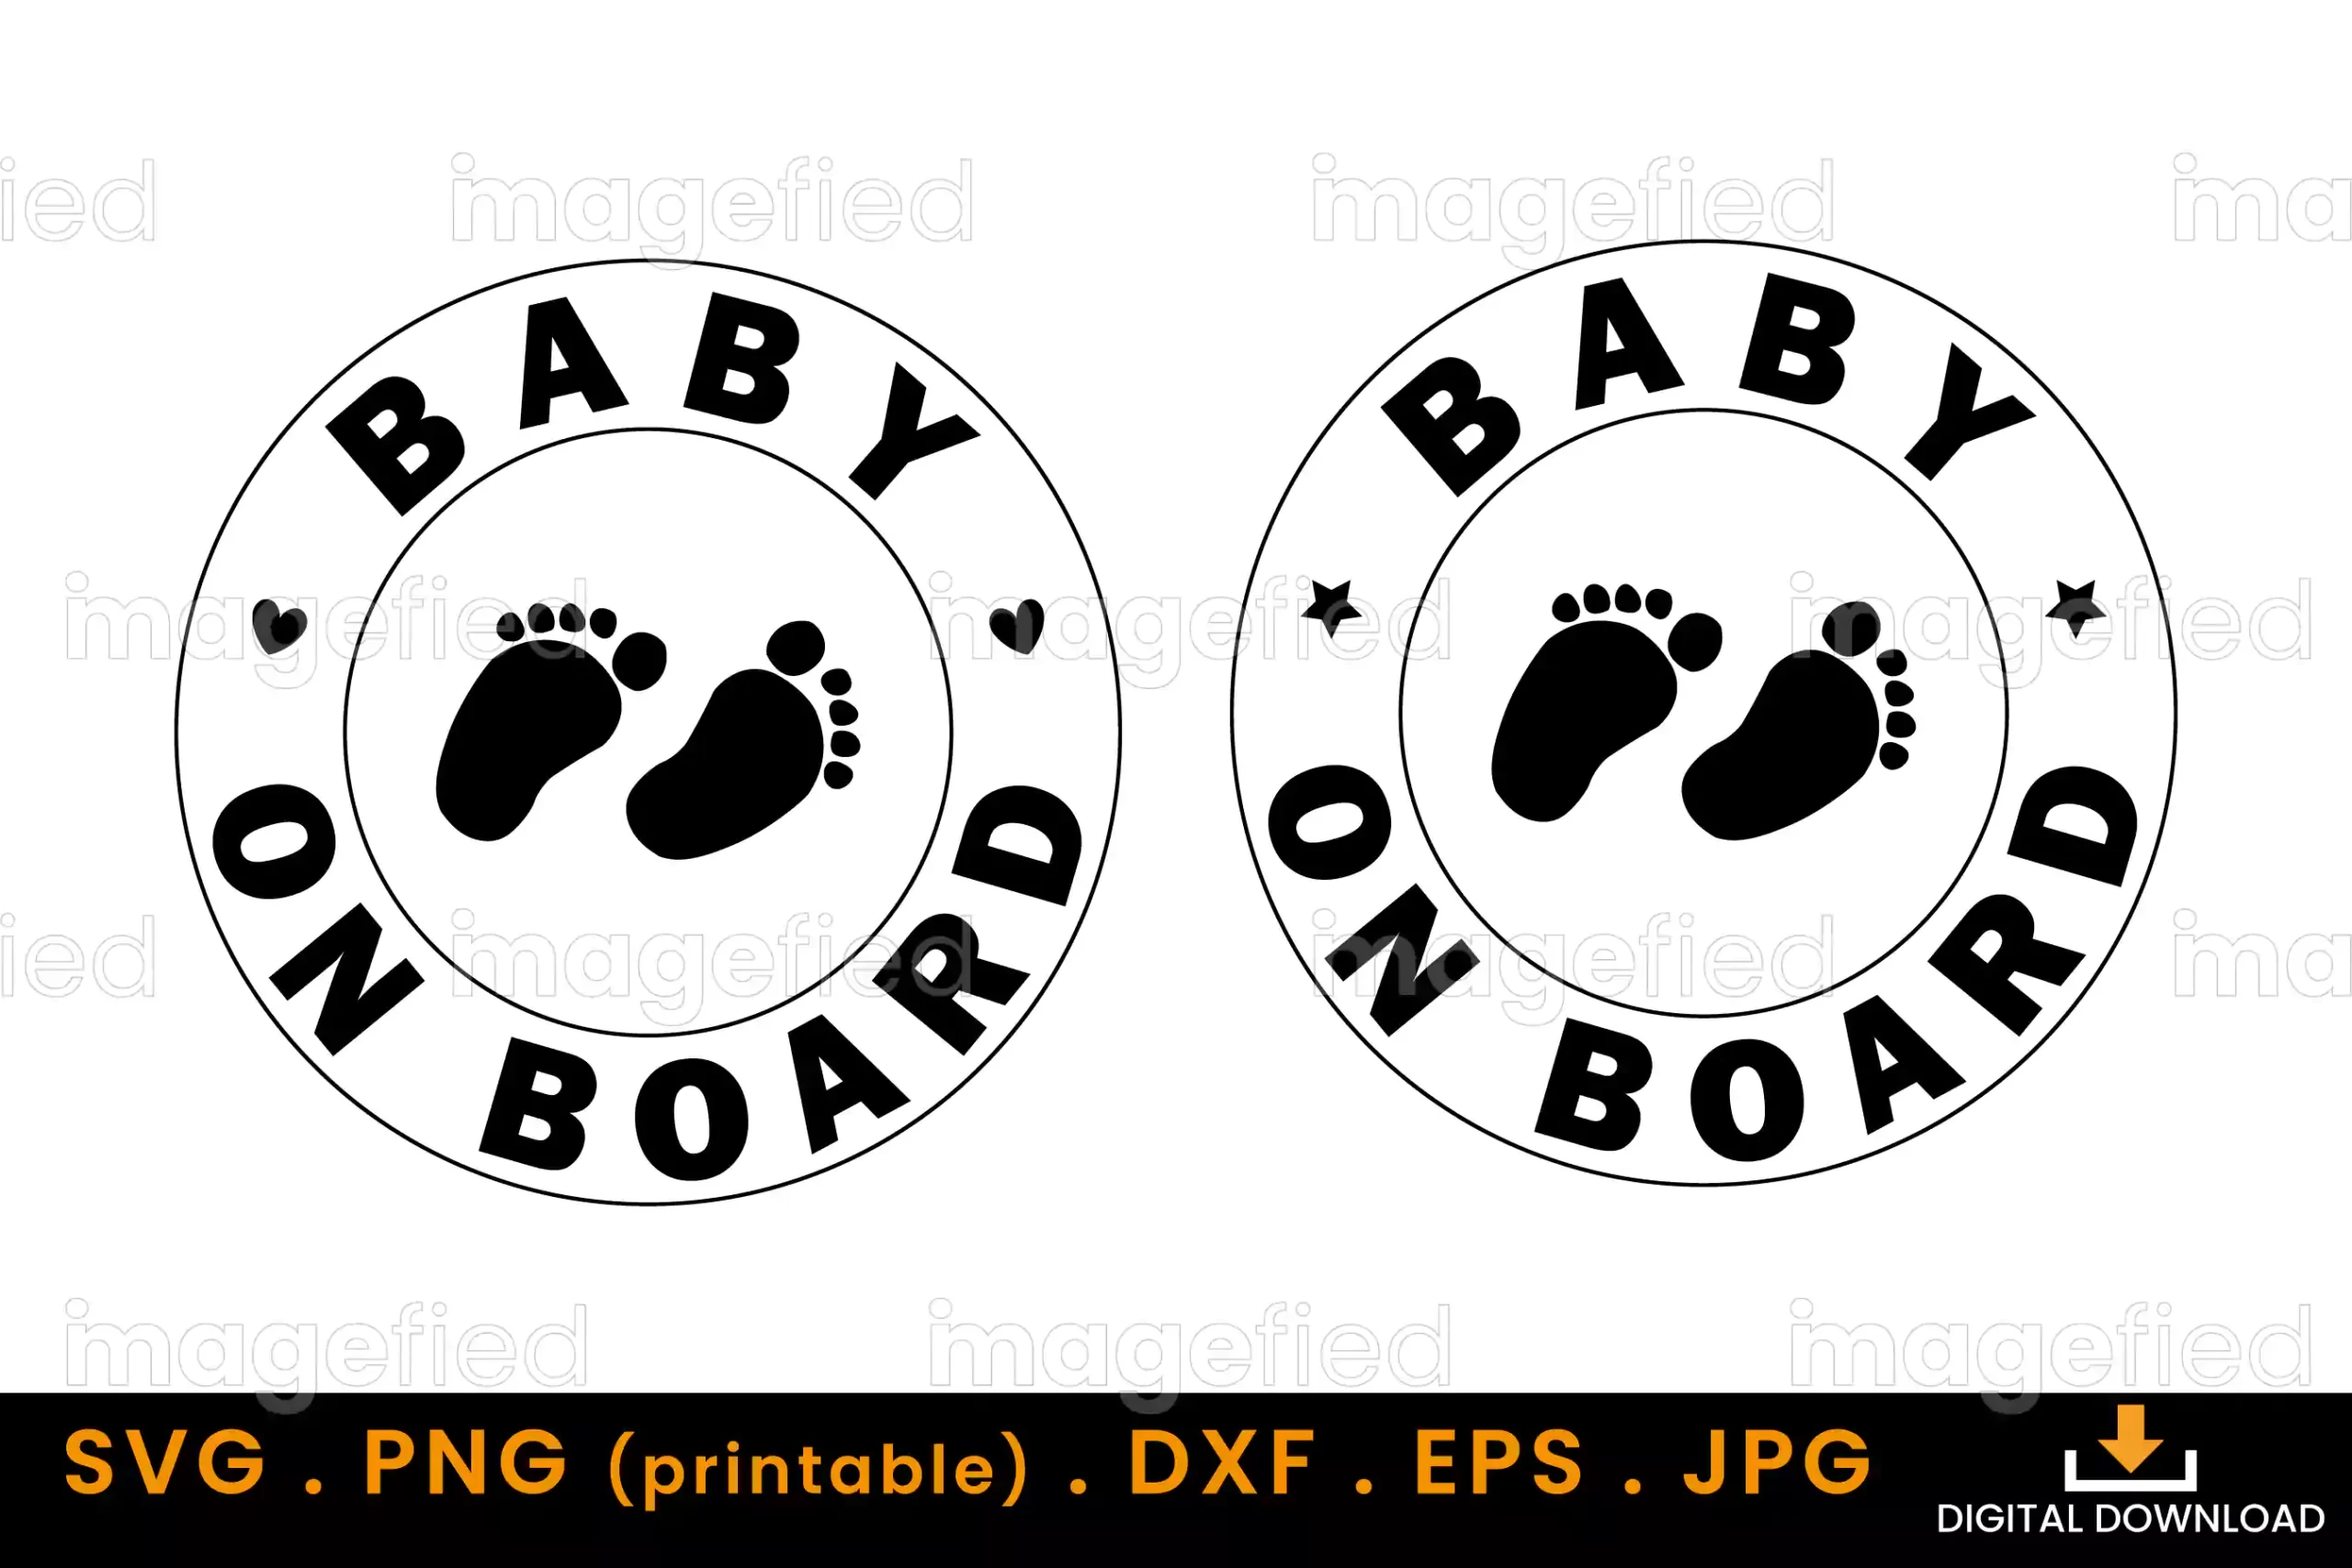 https://imagefied.com/wp-content/uploads//2023/06/Baby-on-Board-Svg-scaled.webp